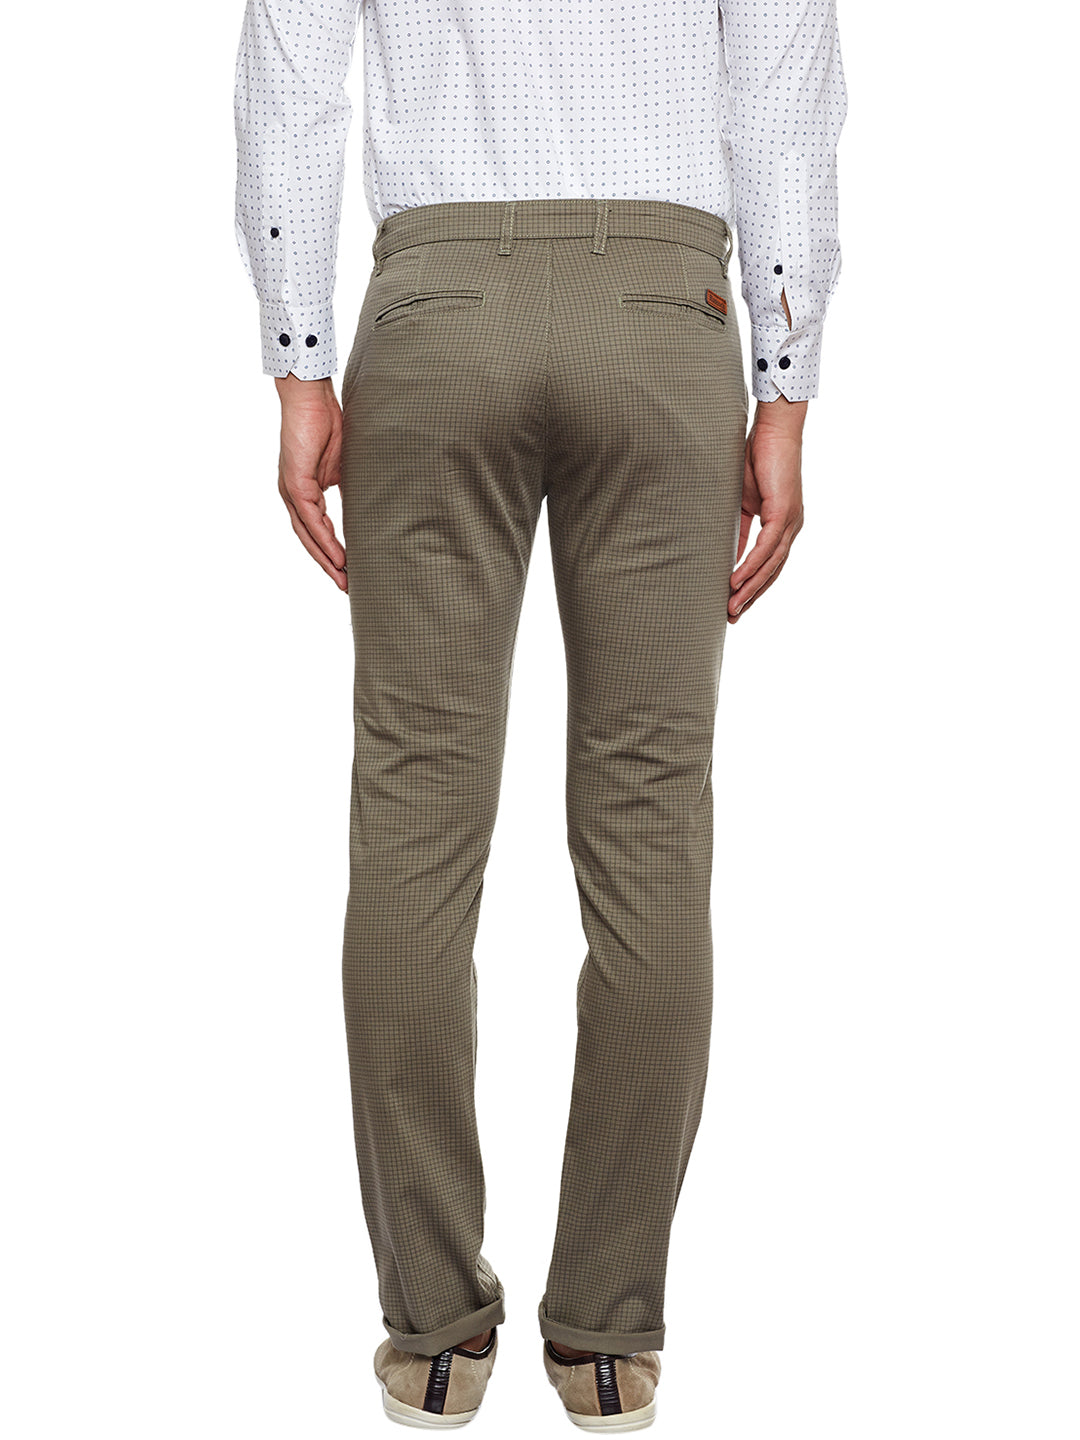 Men Brown Checked Slim Fit Casual Stretchable Chinos Trouser